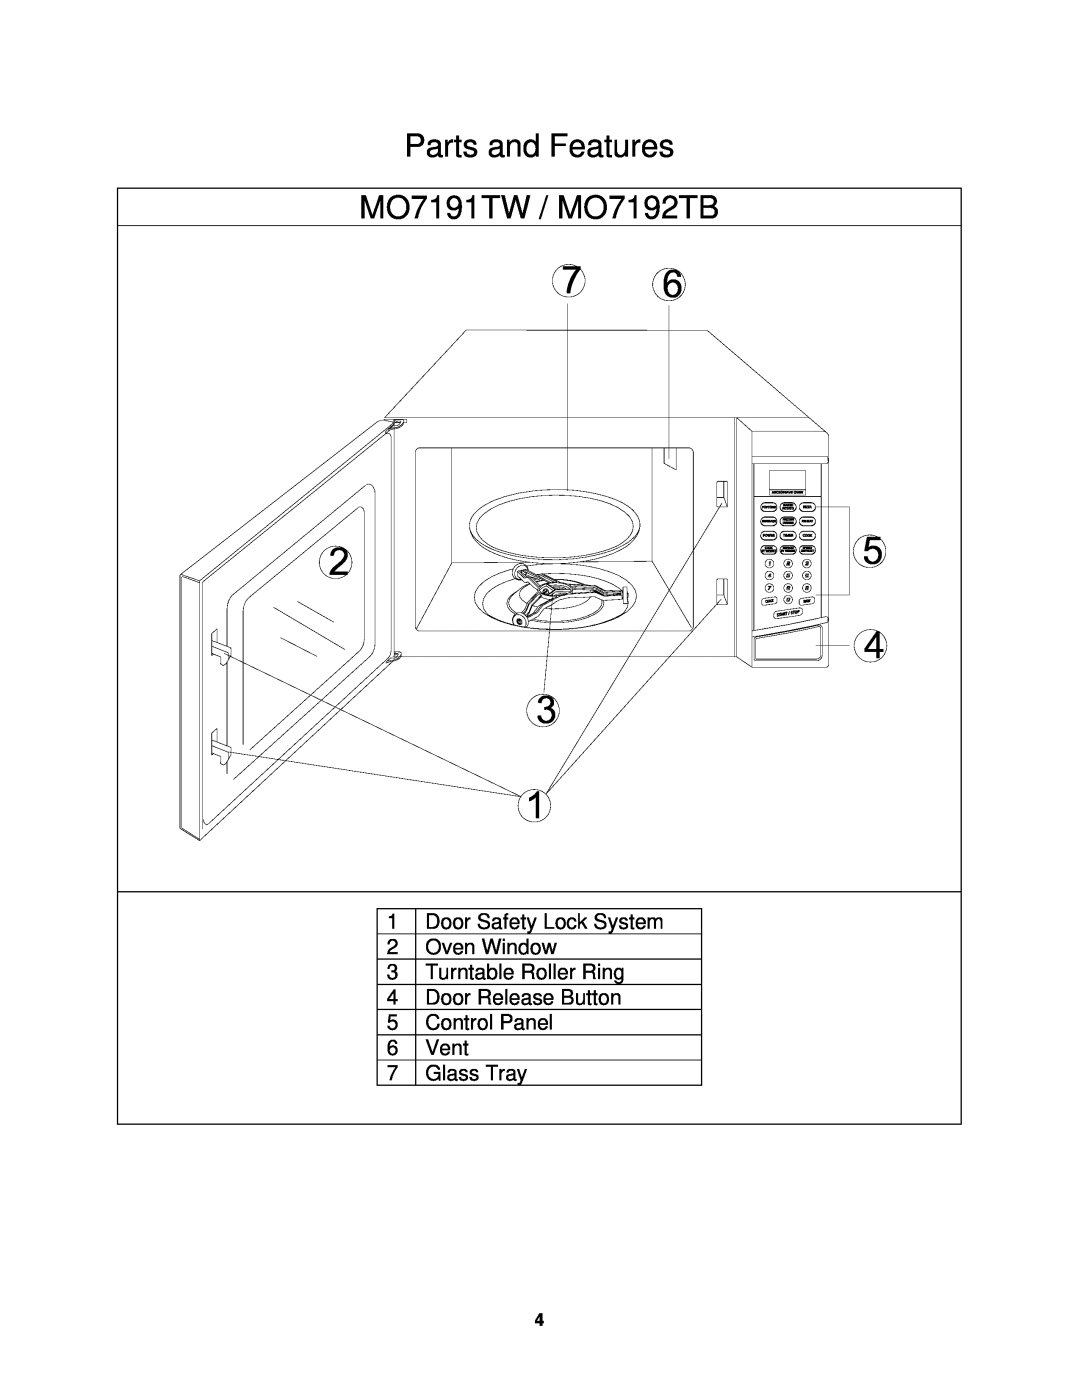 Avanti instruction manual Parts and Features, MO7191TW / MO7192TB 